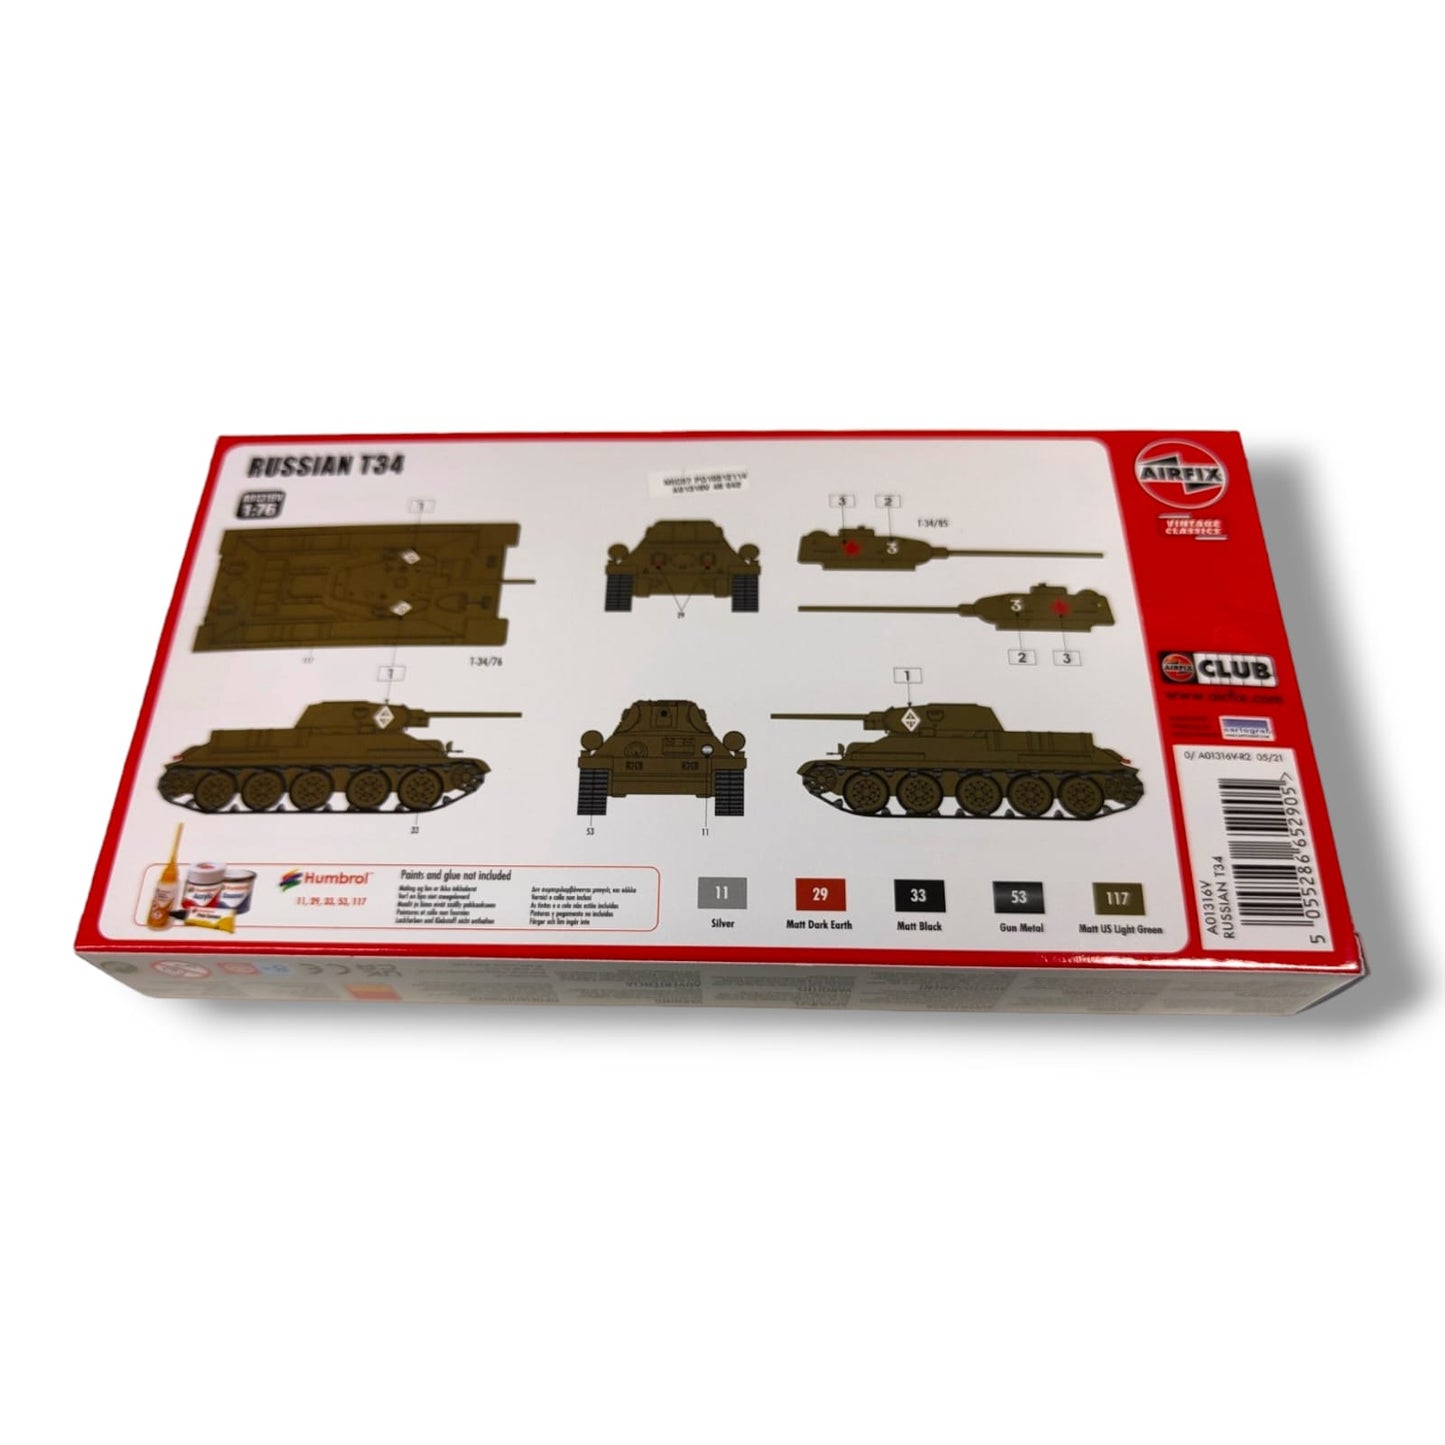 Airfix Russian T34 1/76 scale